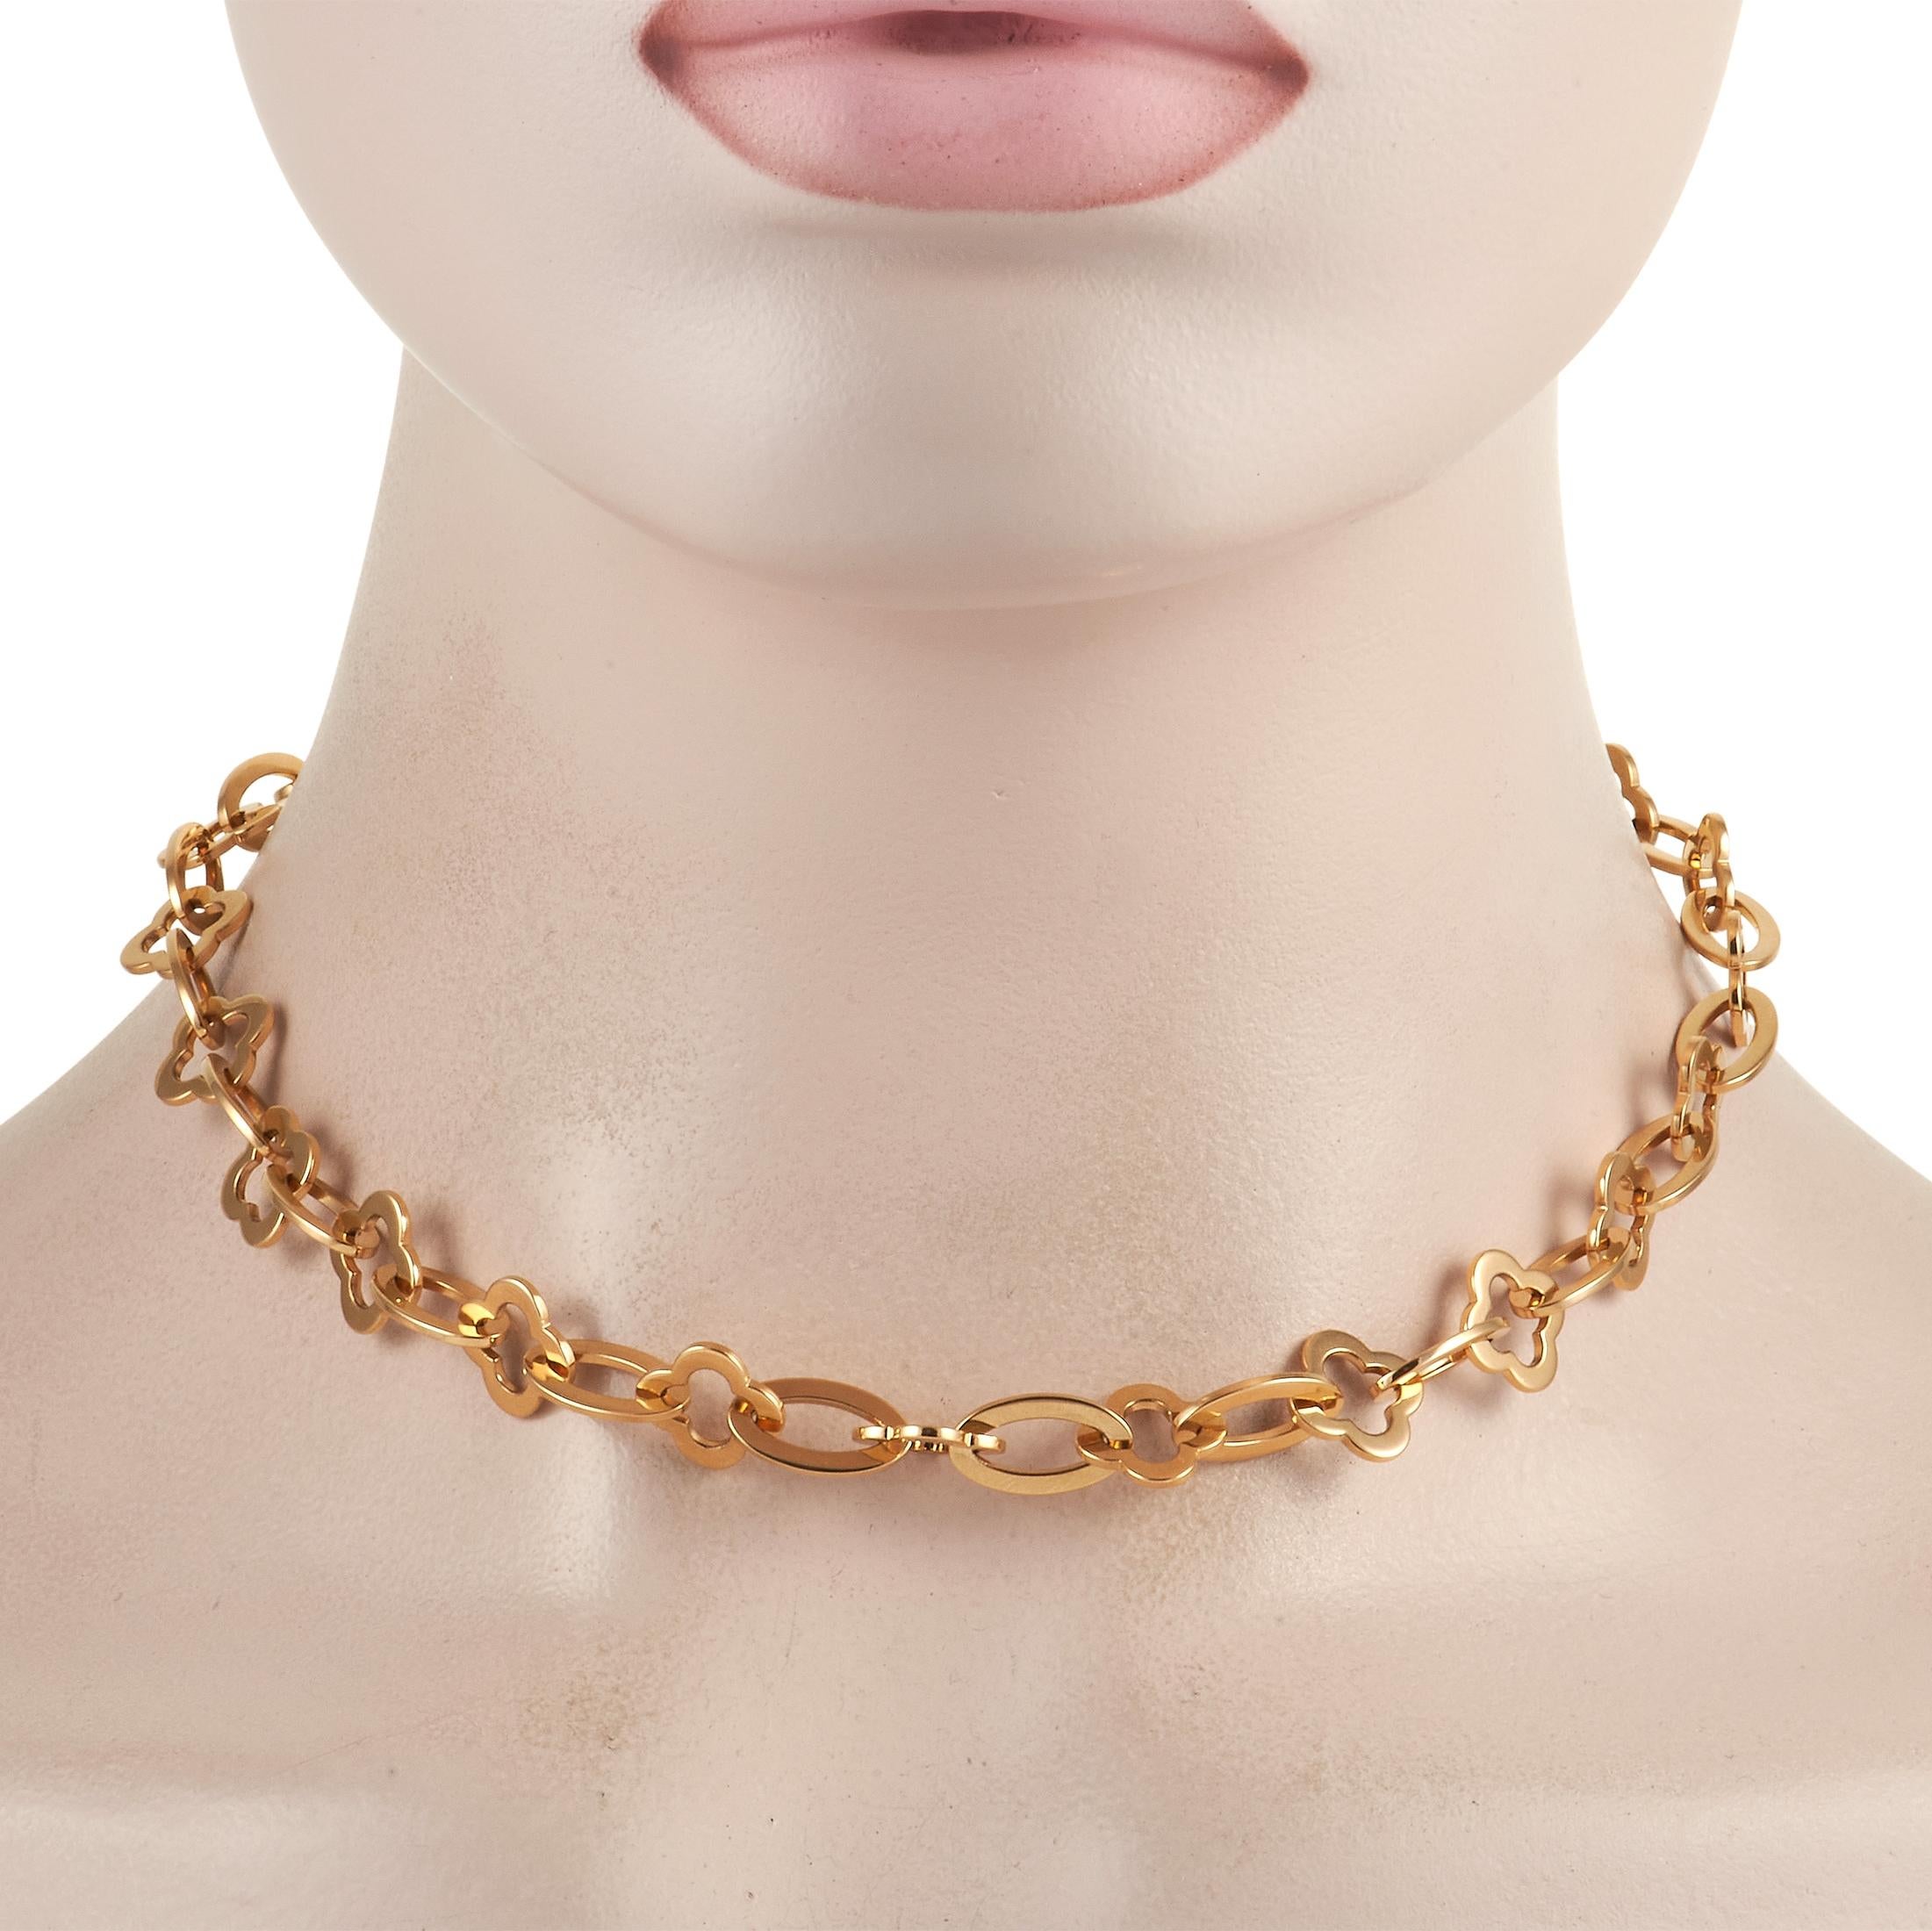 Give your outfits an interesting finish with this Van Cleef & Arpels 18K Yellow Gold Byzantine Alhambra Necklace. It features a chunky chain link design in yellow gold composed of alternating oval and clover-inspired Alhambra links. This necklace